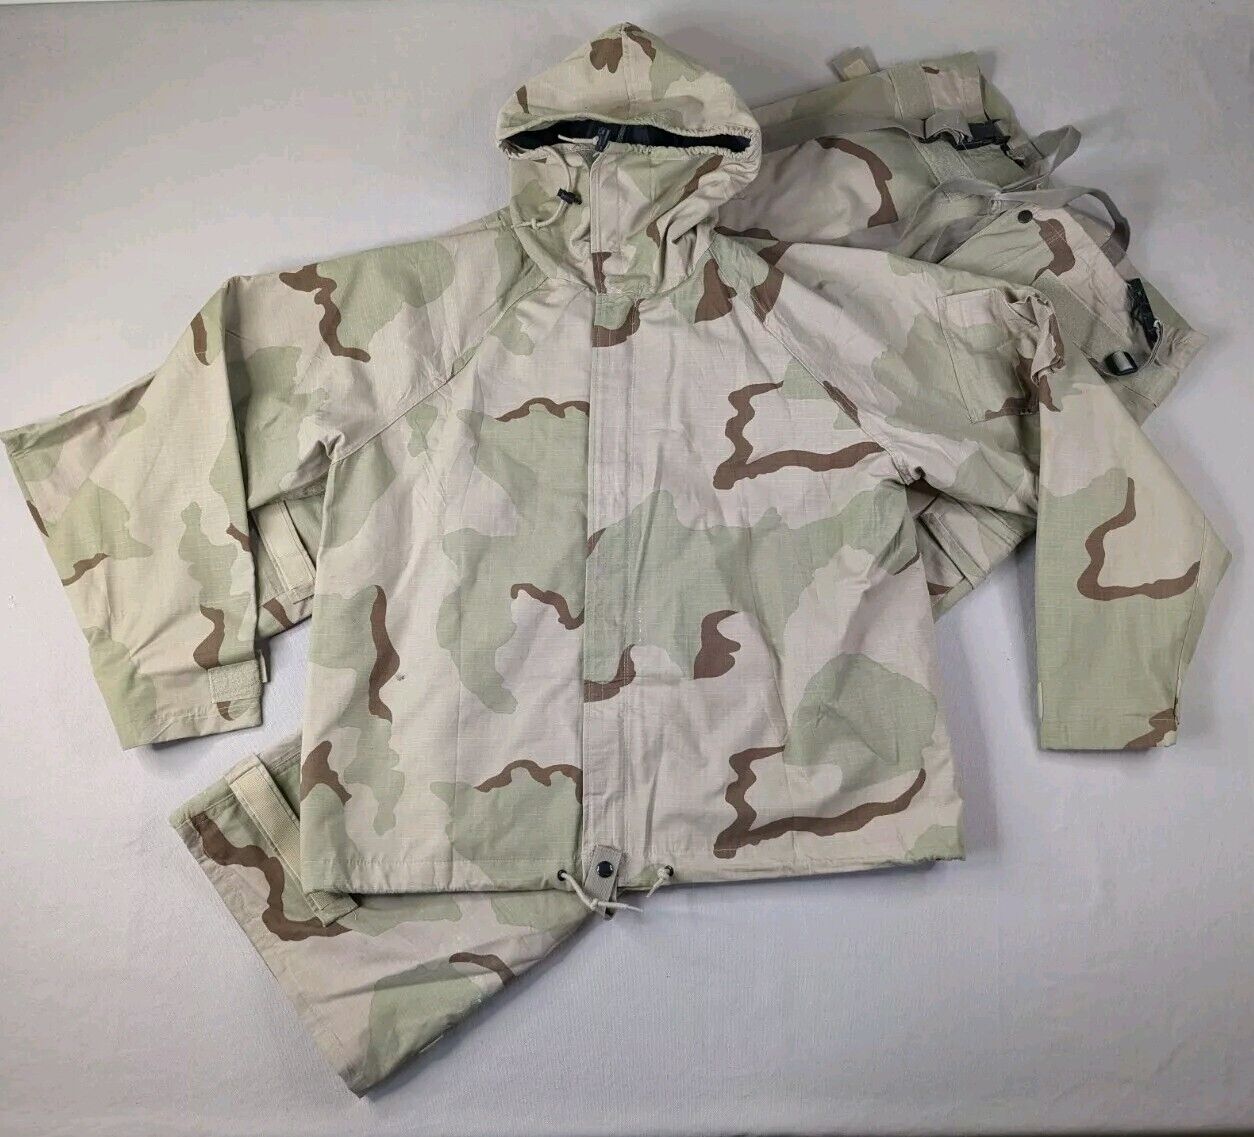 Military Issue Chemical Protective NFR Overgarment Suit Adult Medium Desert Camo